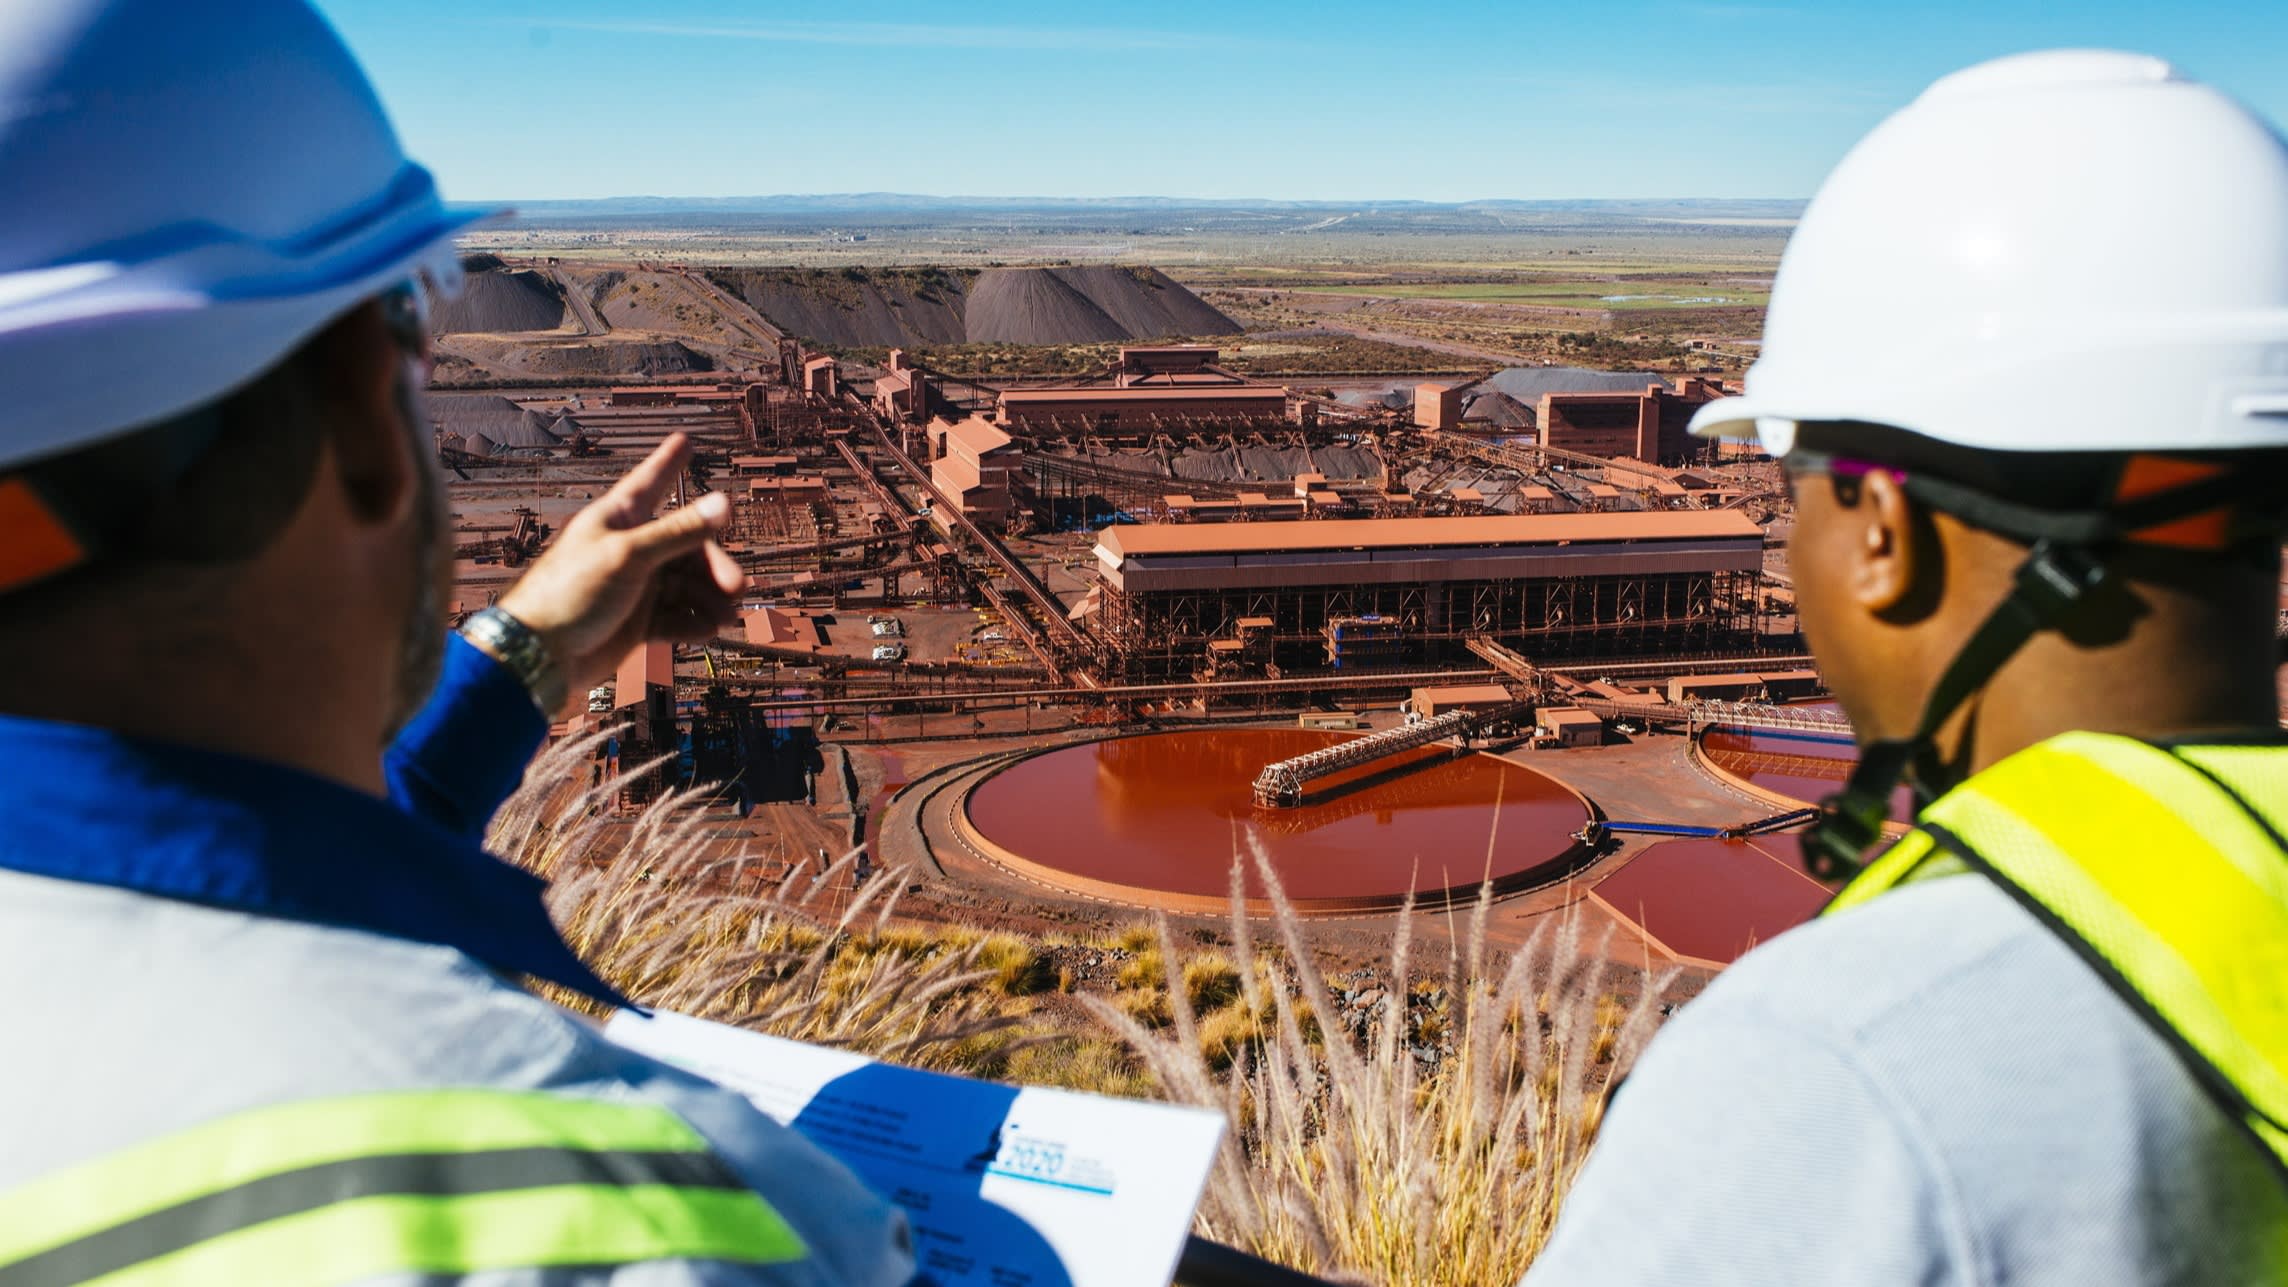 Processing plant at the Sishen open-cast mine, operated by Anglo American’s Kumba Iron Ore